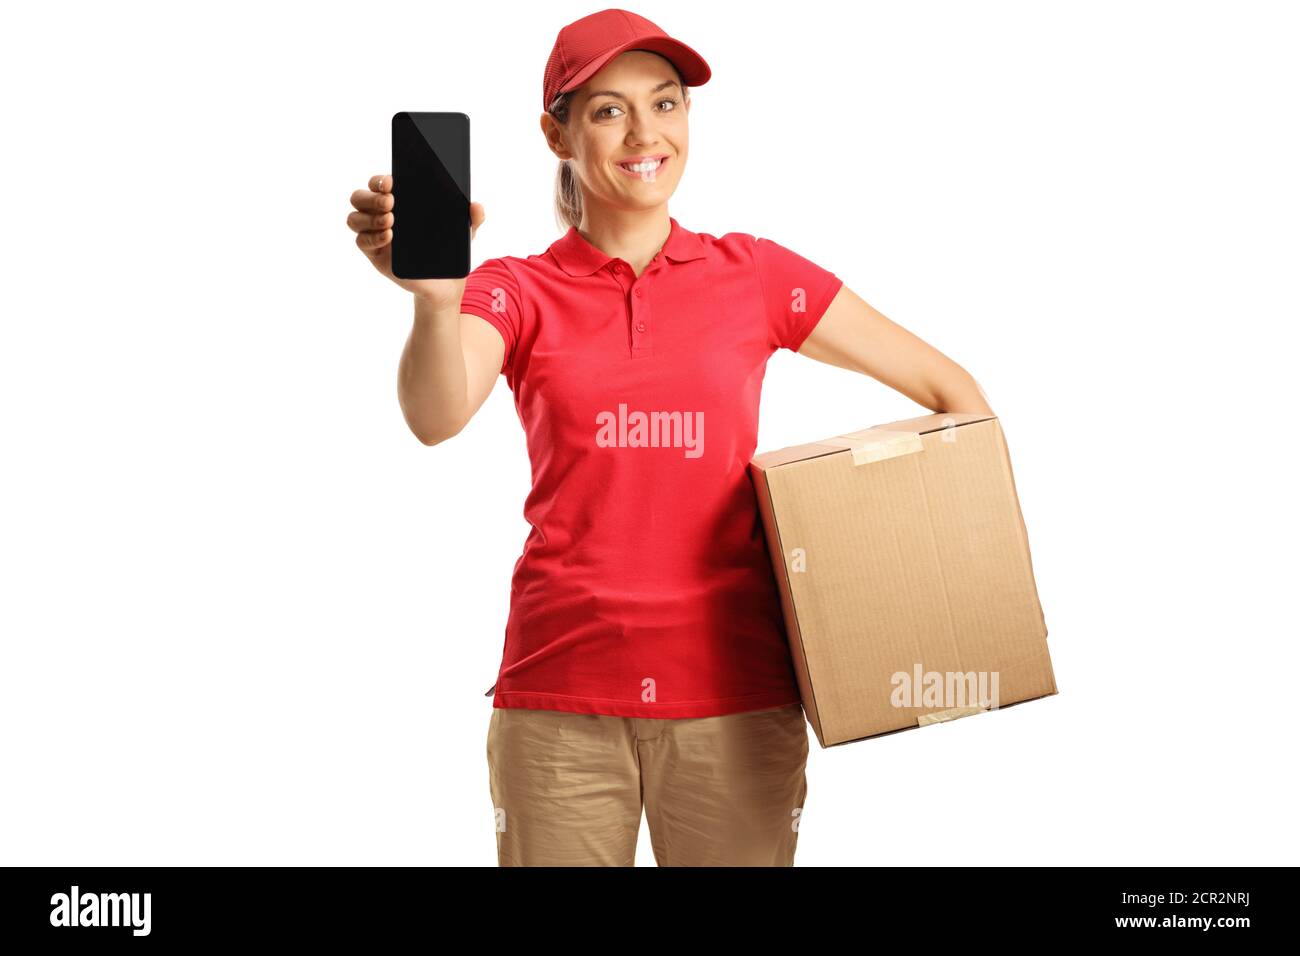 Female delivery worker in a red t-shirt holding a box and showing a mobile phone isolated on white background Stock Photo